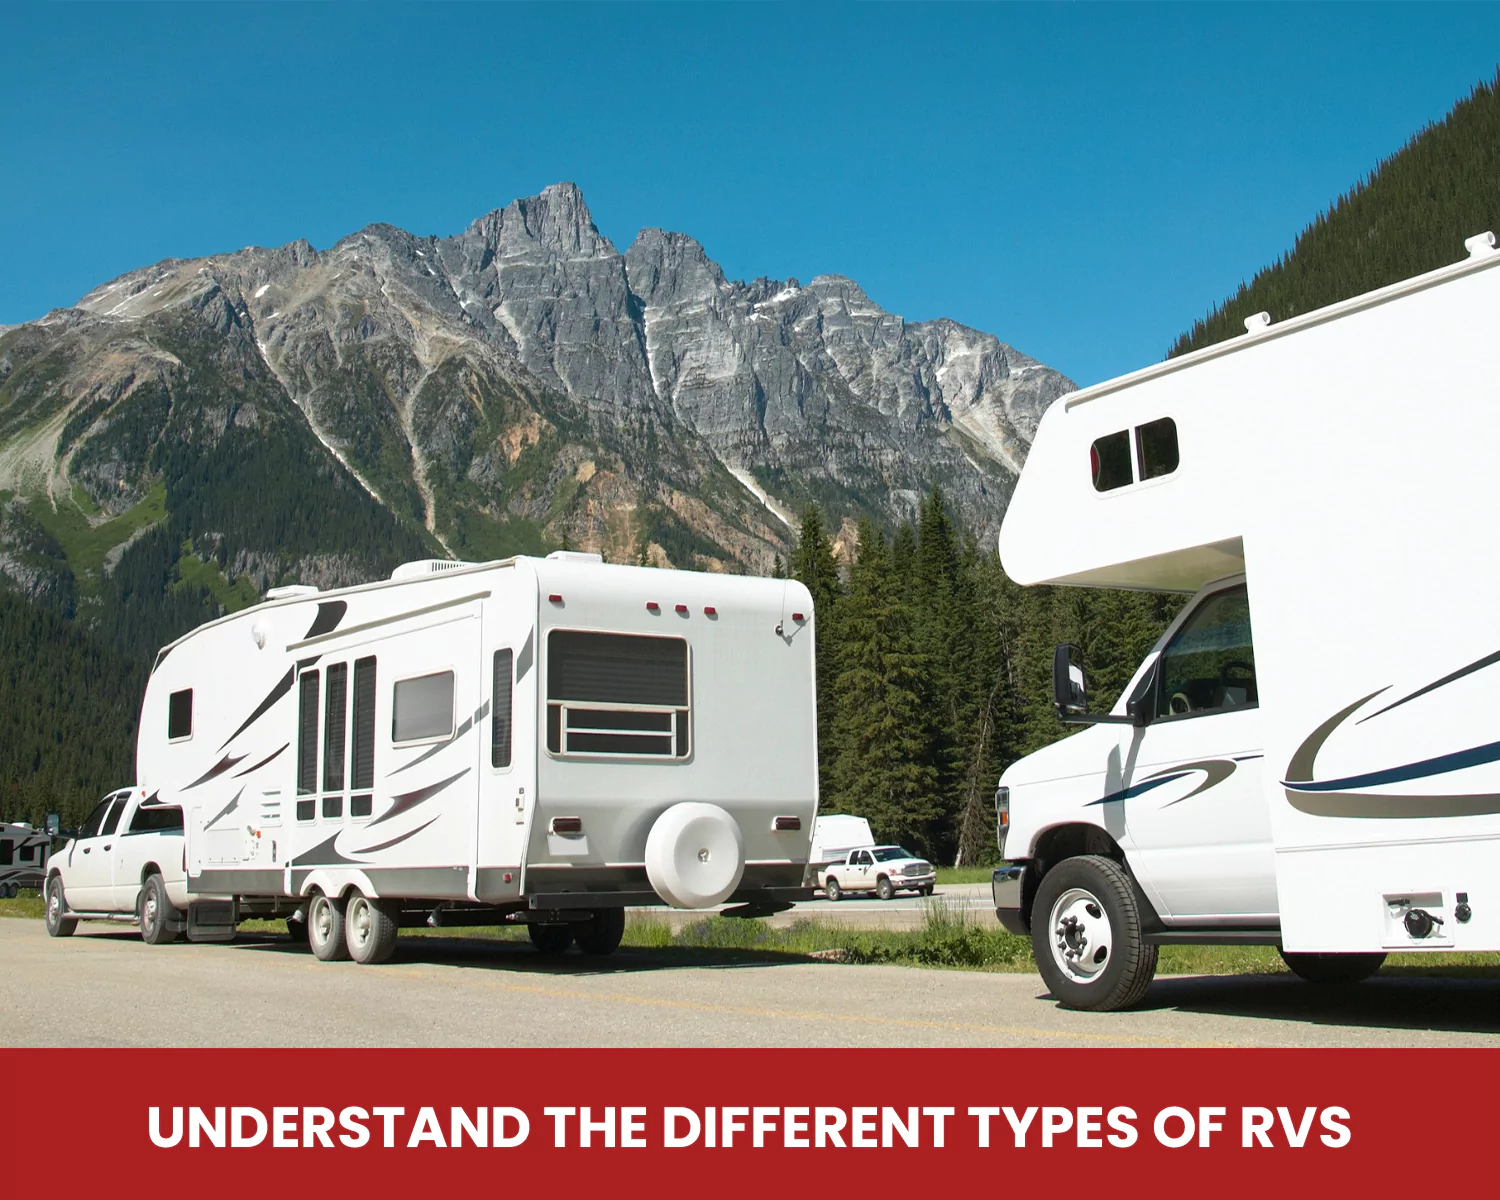 Understand the Different Types of RVs